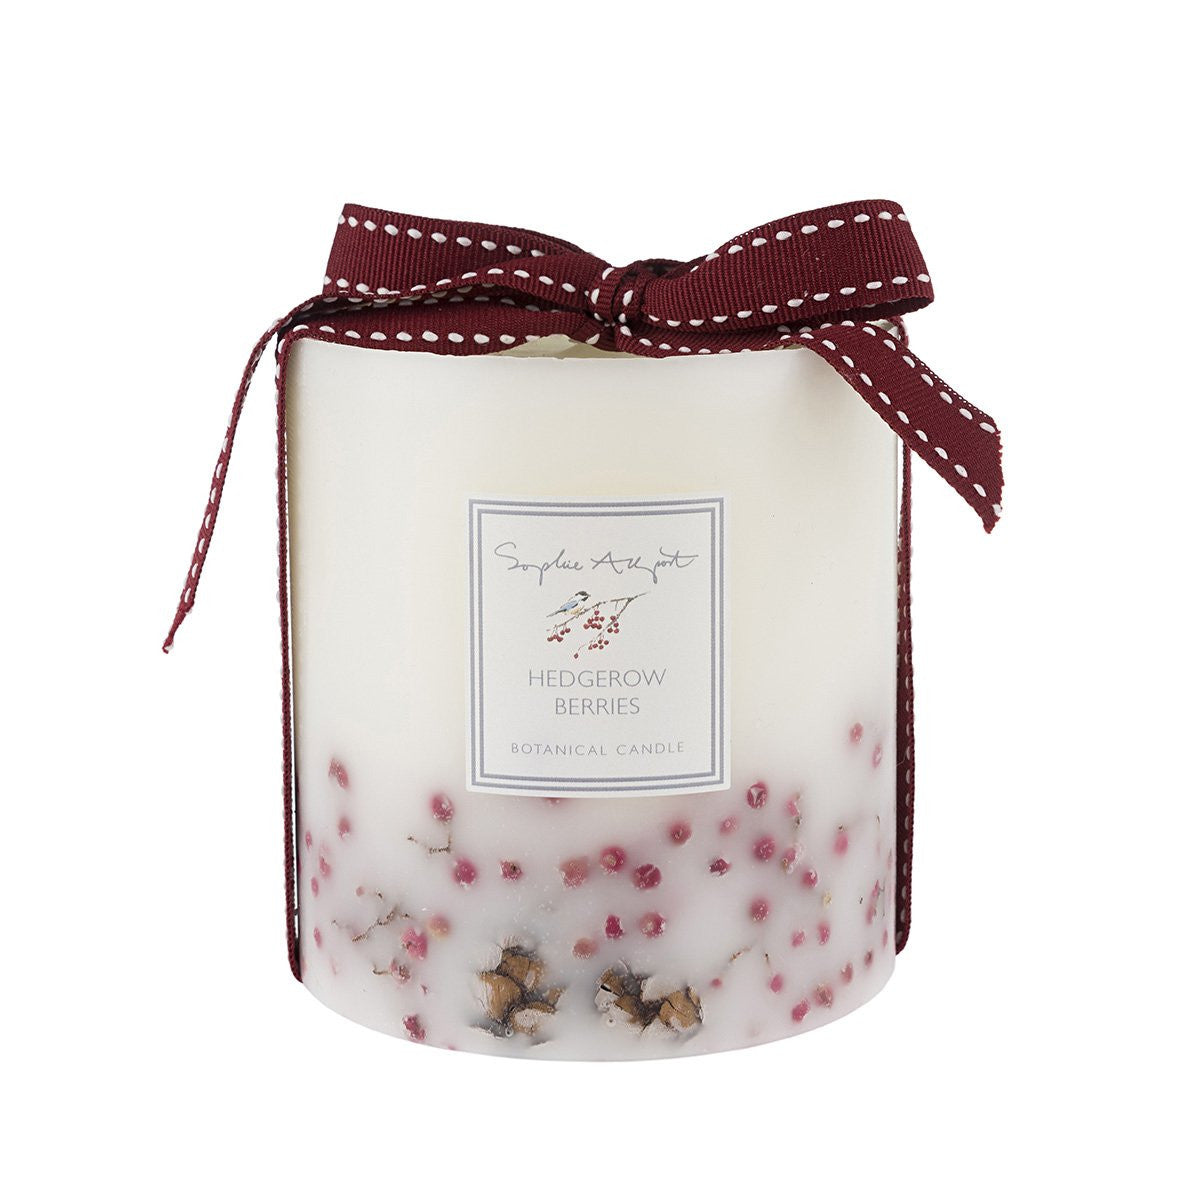 Sophie Allport Hedgerow Berries Botanical Candle